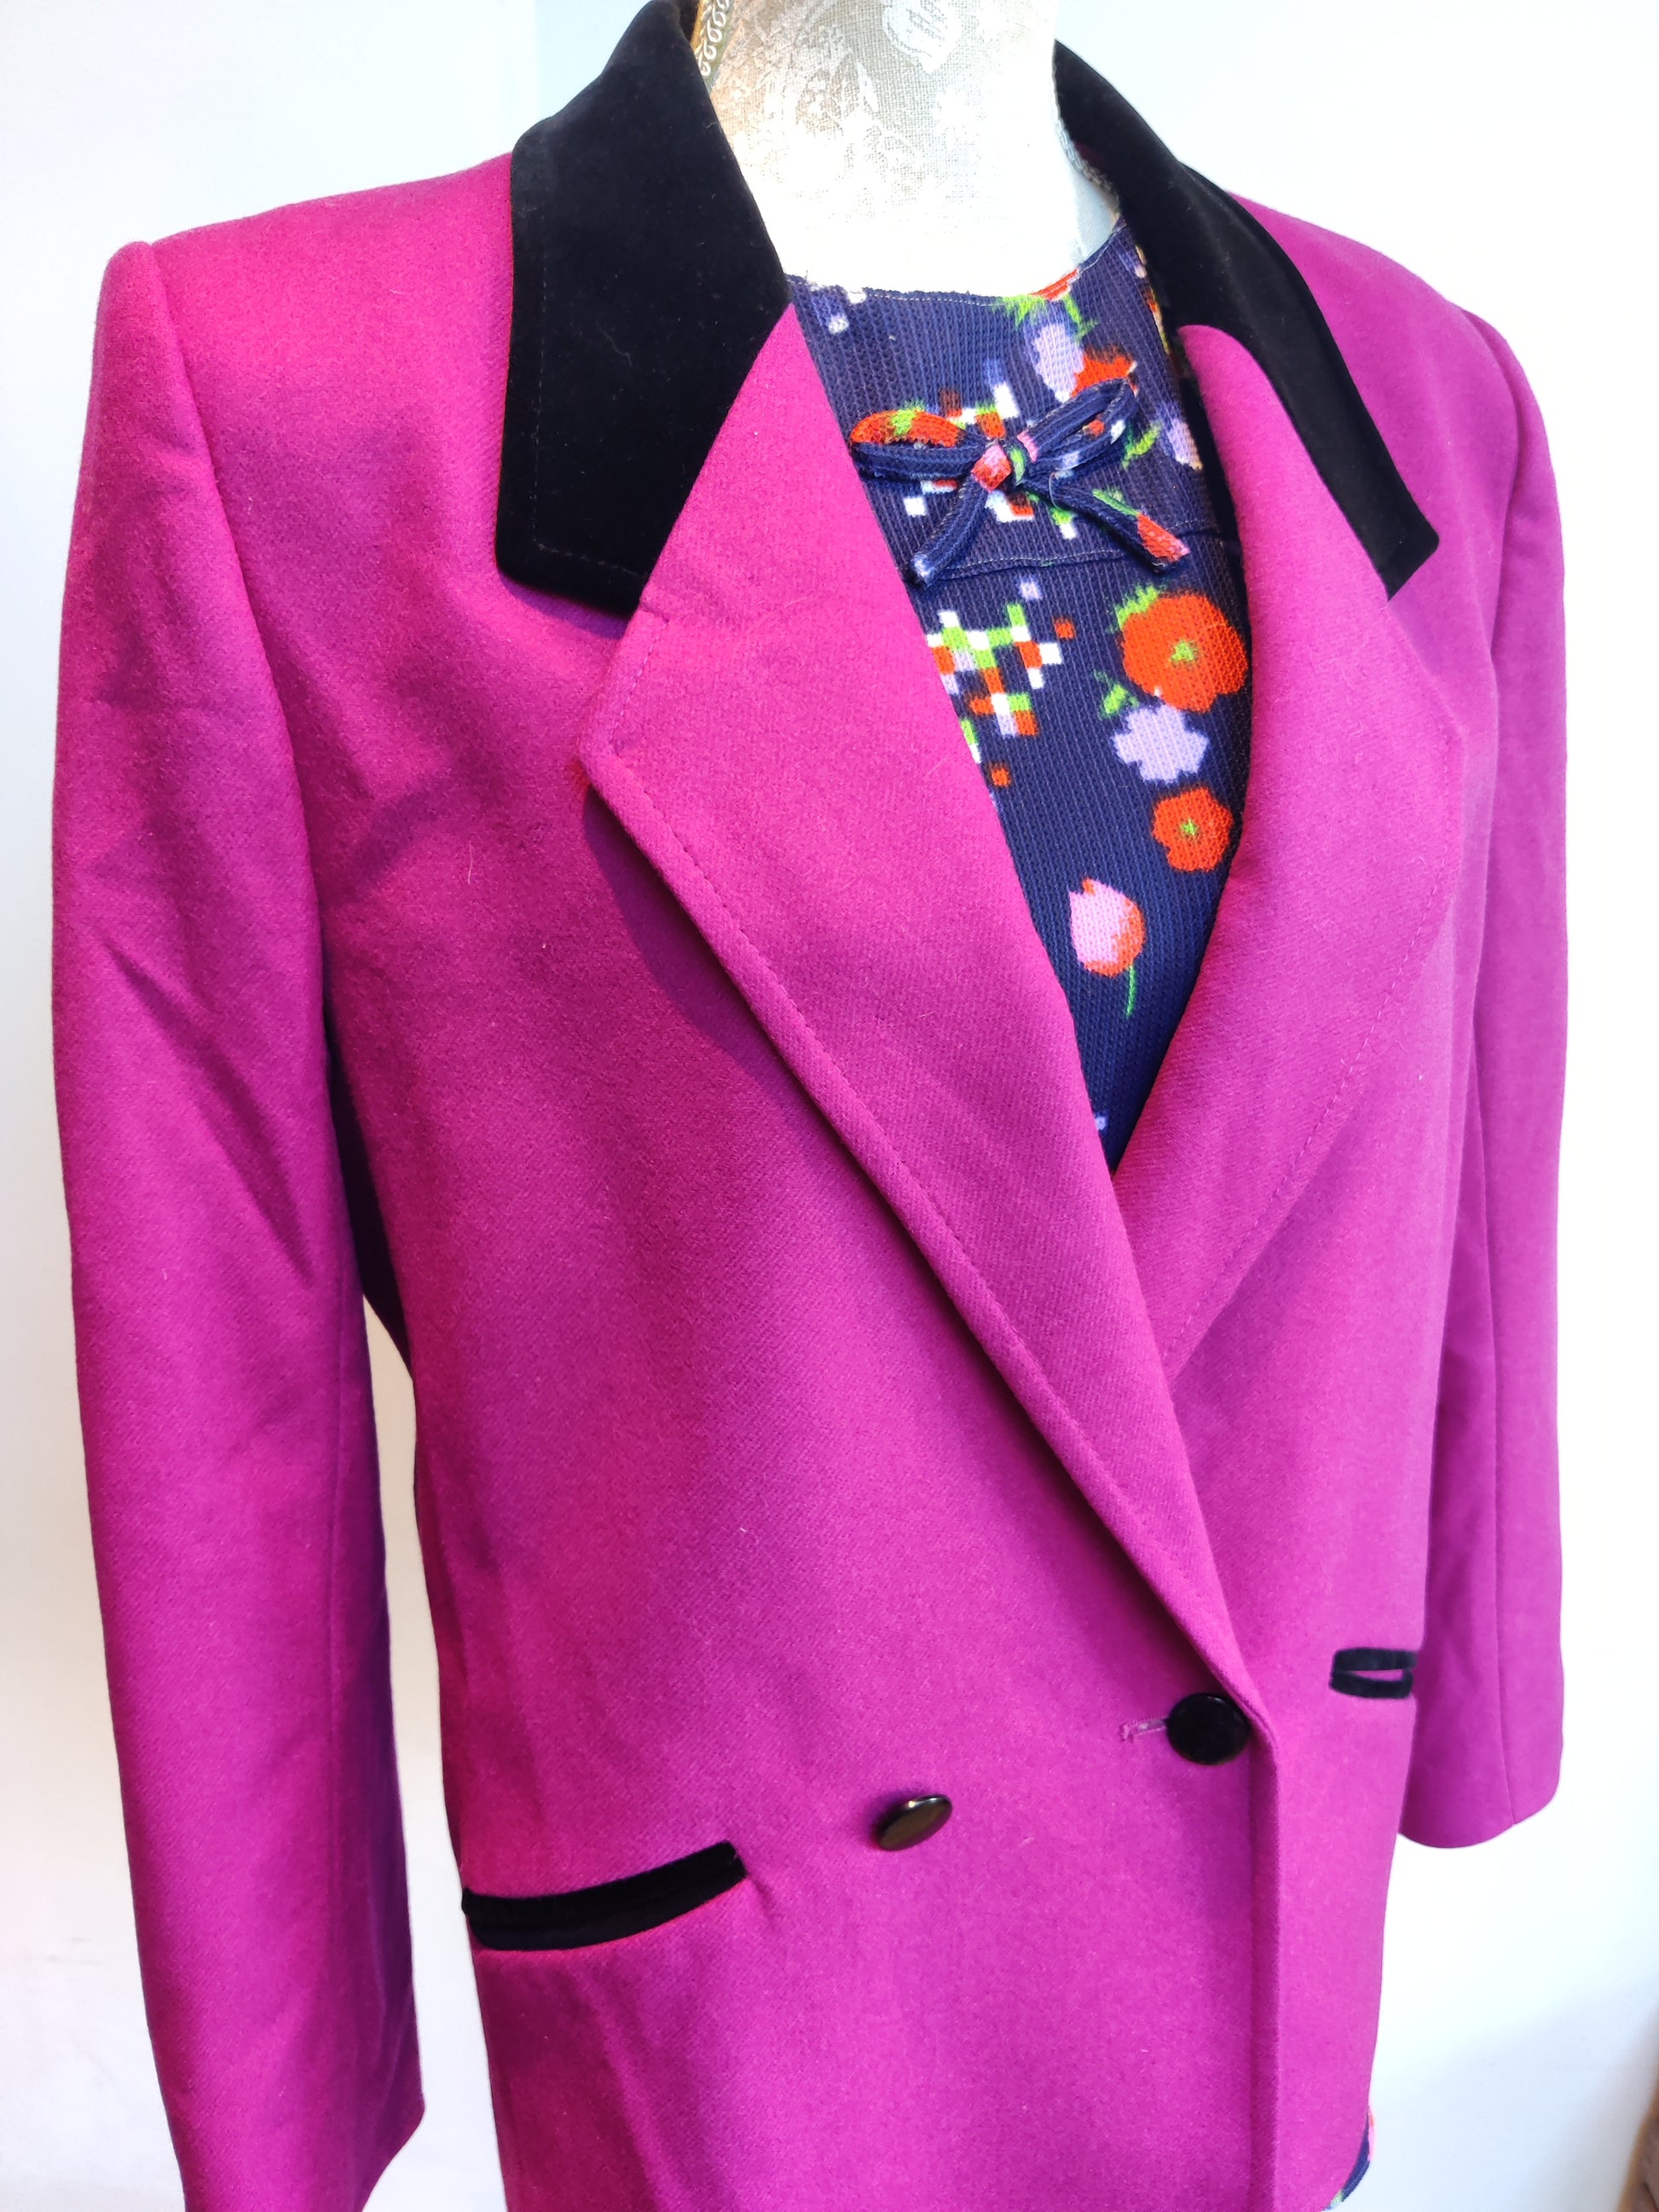 Pink and black 80s blazer by Windsmoor